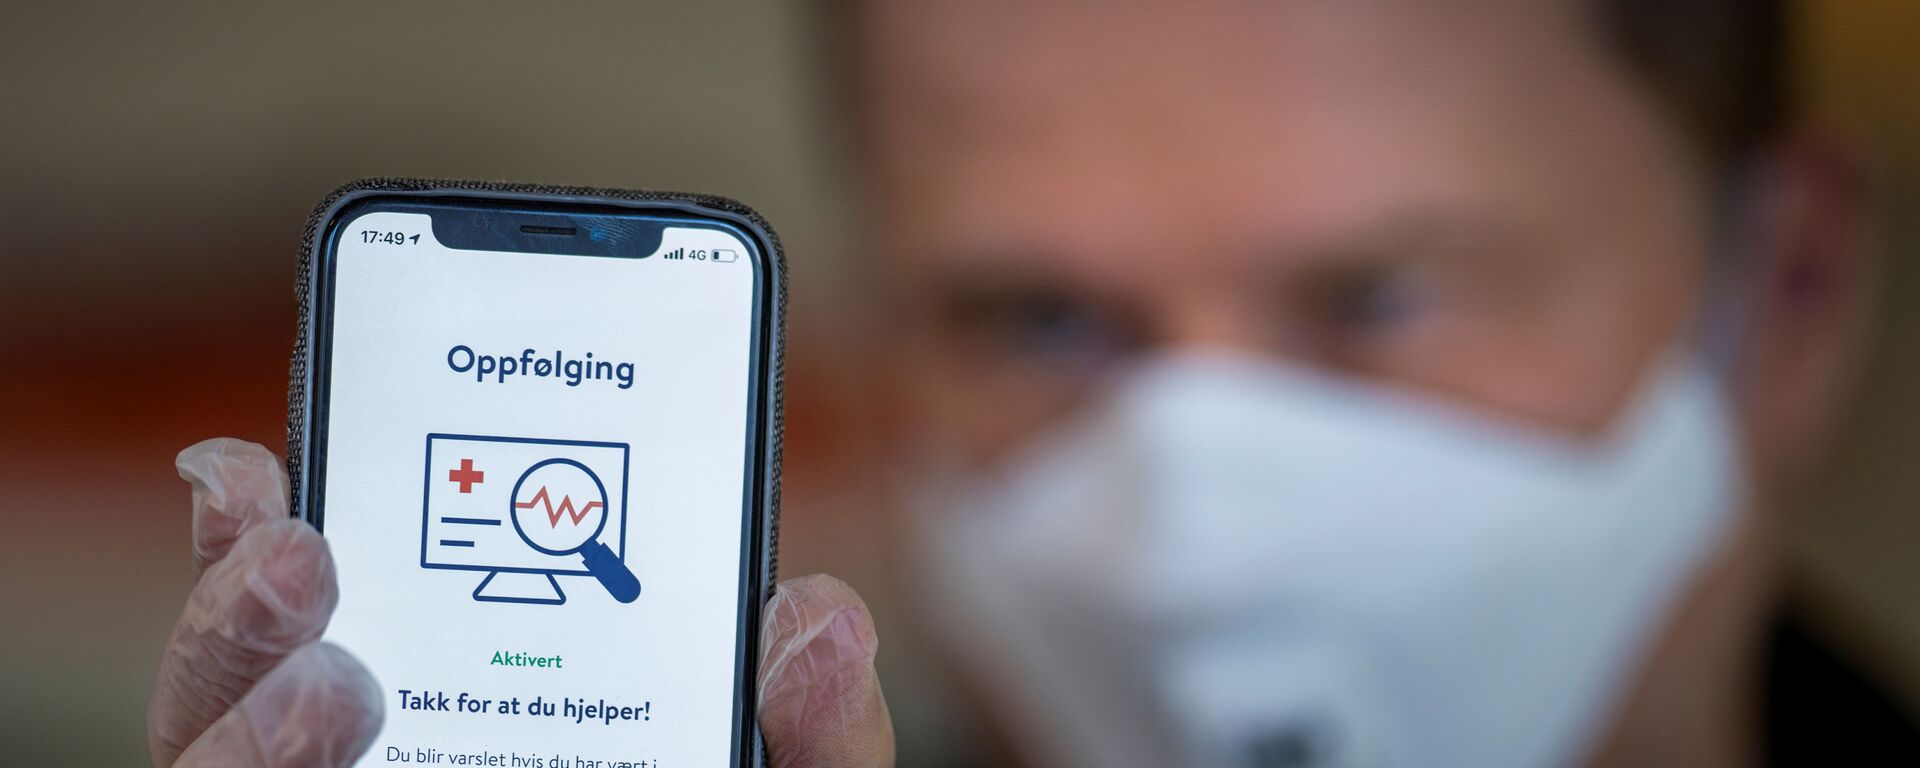 FILE PHOTO: The National Institute of Public Health's new app Smittestopp (Infection Stop) for infection tracking is pictured, in Oslo, Norway April 16, 2020. Picture taken April 16, 2020 - Sputnik International, 1920, 16.03.2021